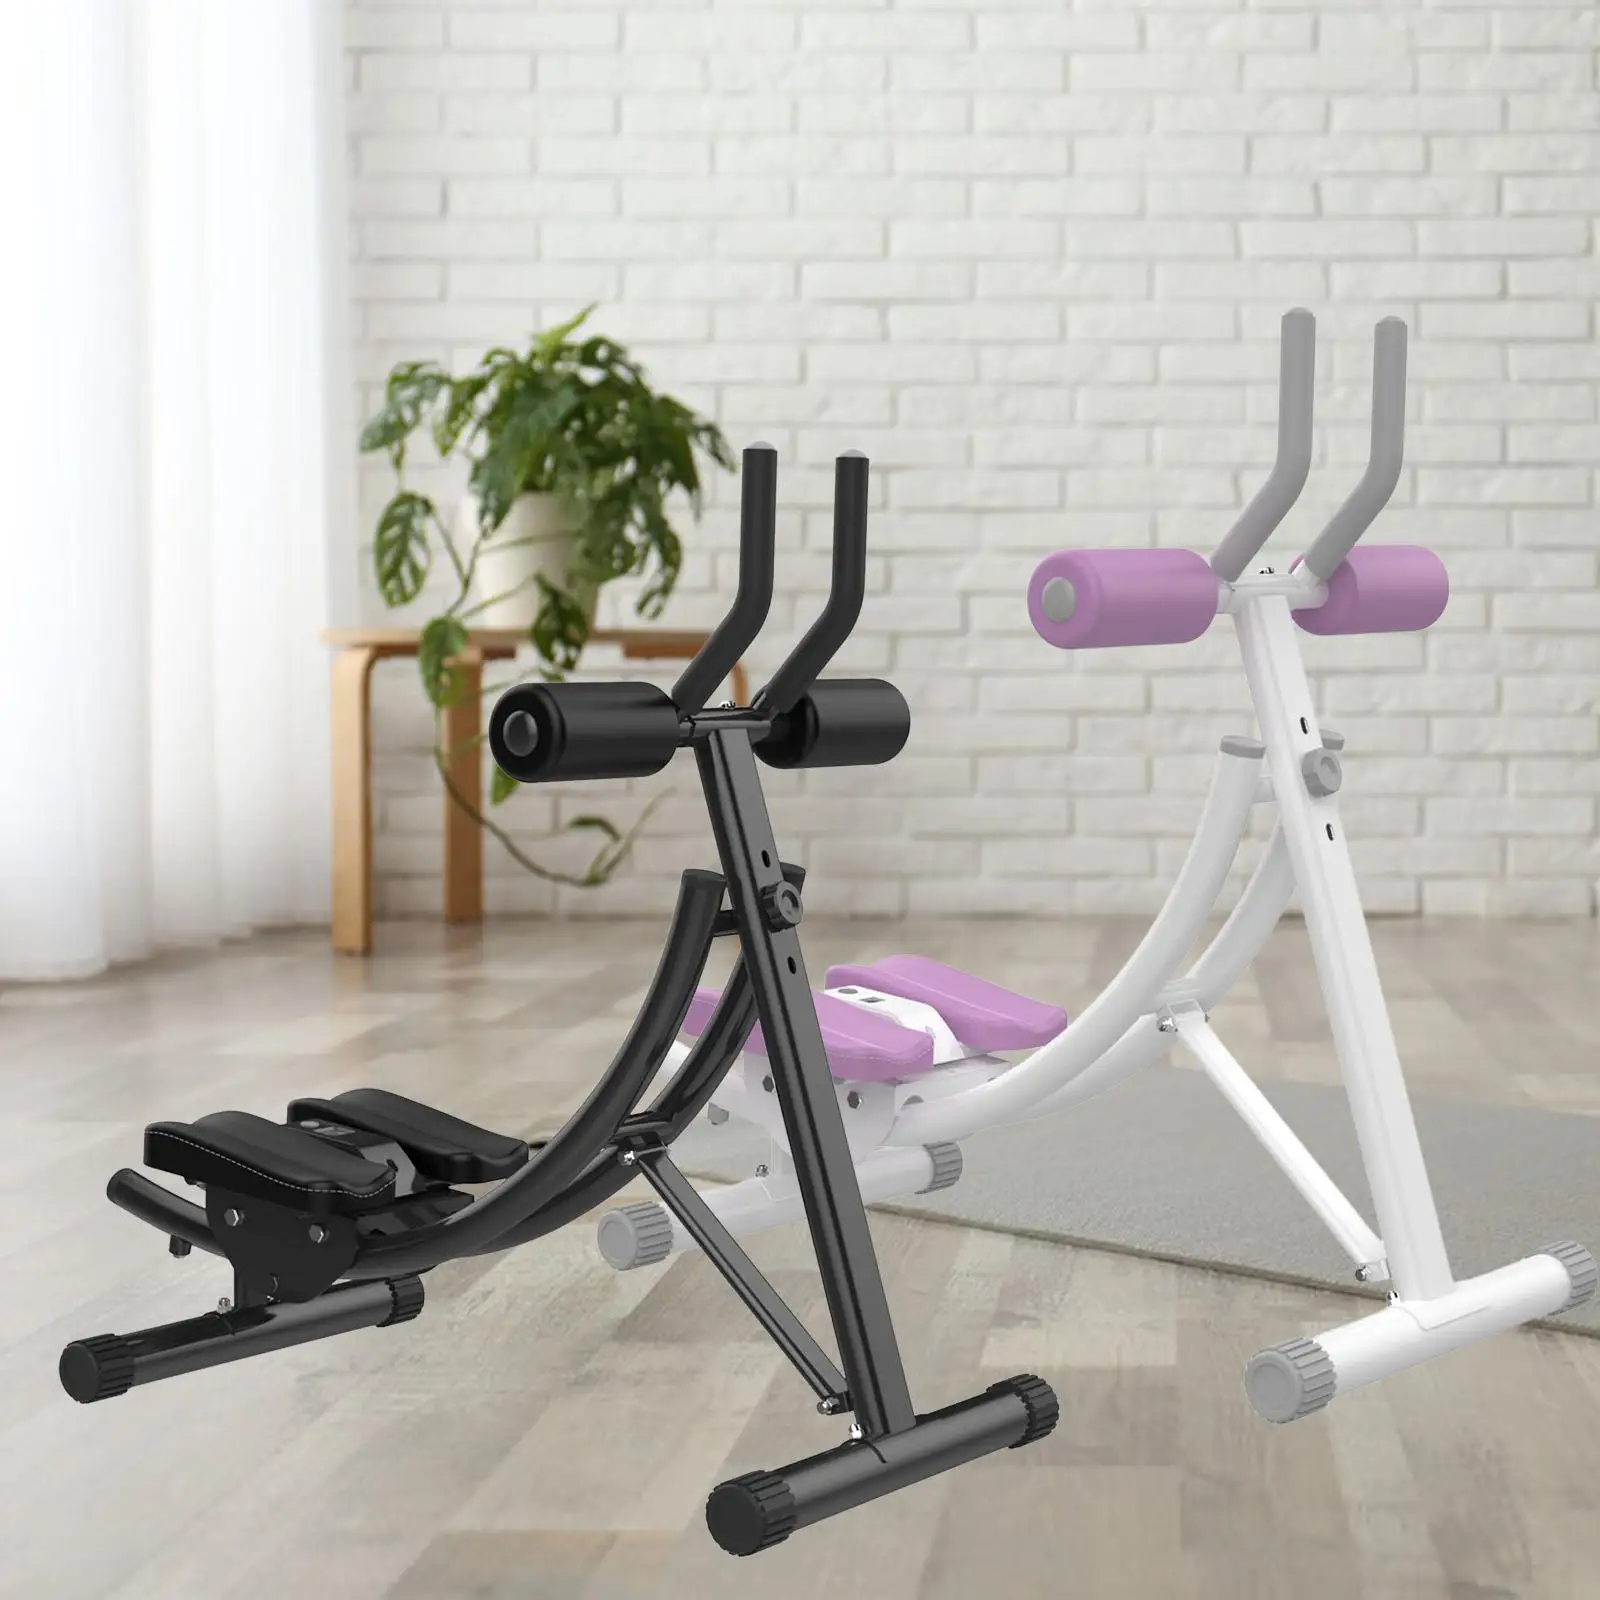 Portable Abdominal Workout Machine with LED Display Home Gym Use Fitness Equipment Body Building Core Abdominal Trainers